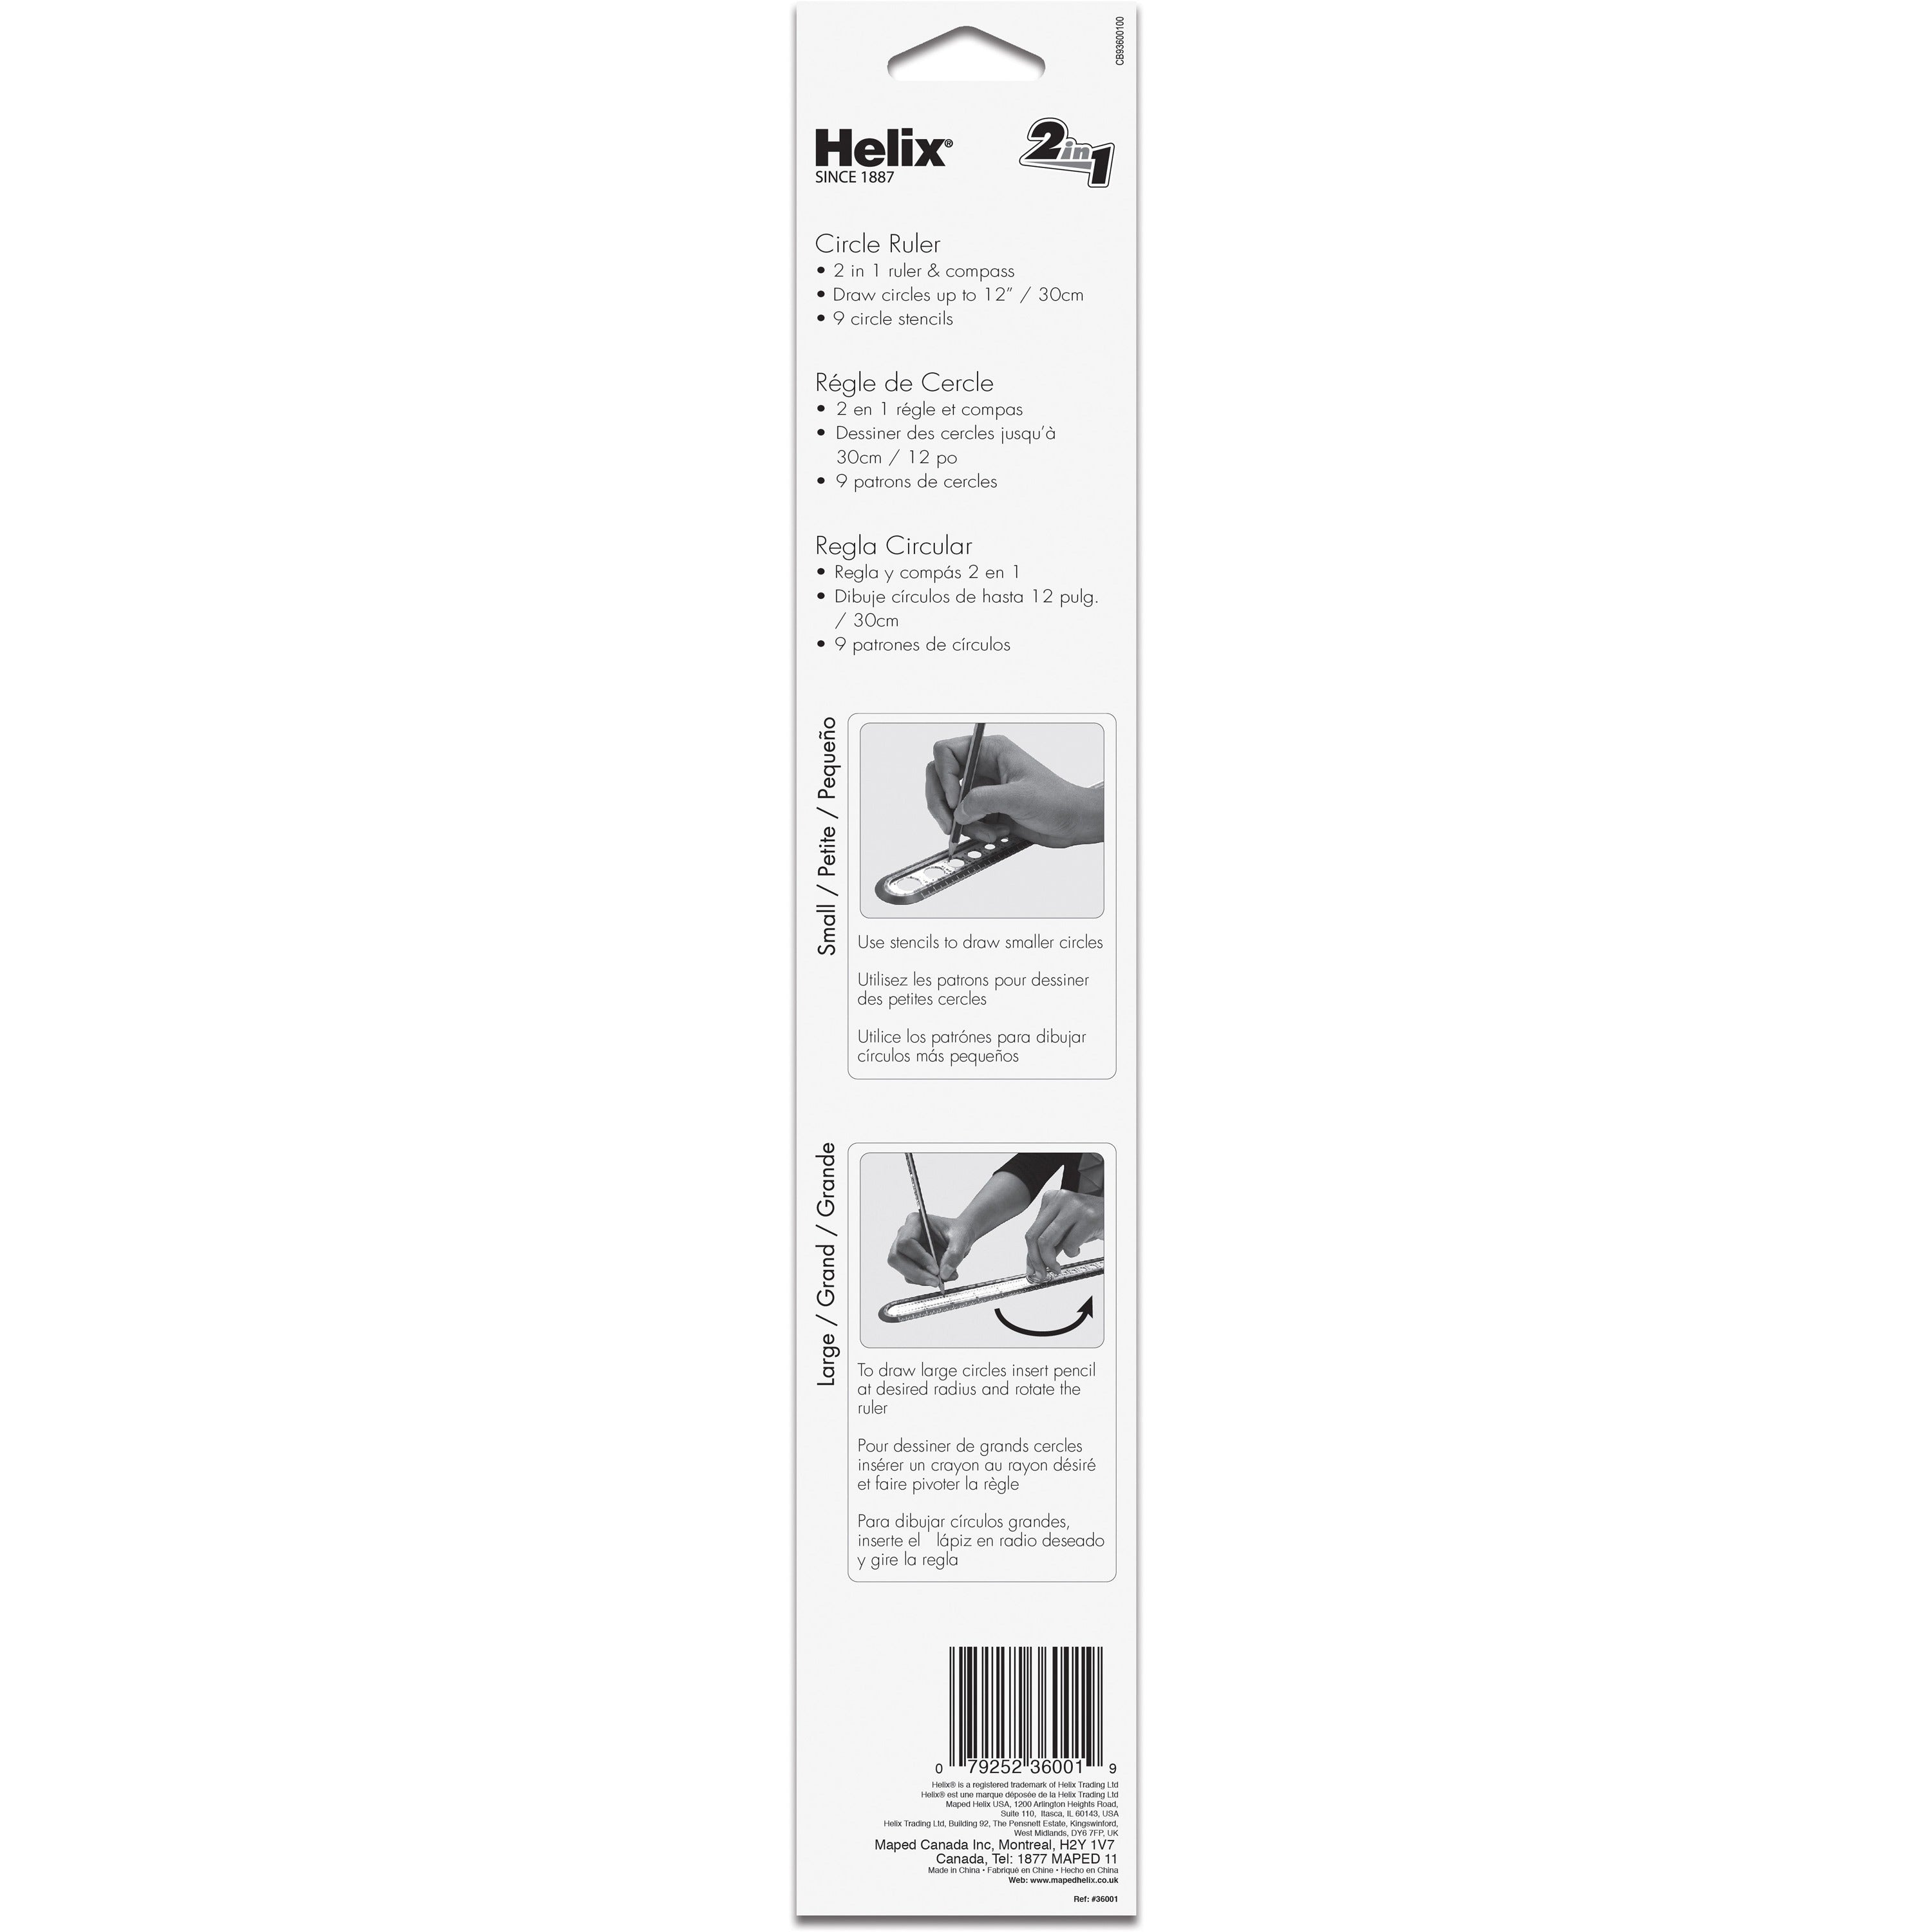 helix-ruler-30cm-12-graduations-imperial-metric-measuring-system-plastic-5-box-assorted_hlx36001 - 2